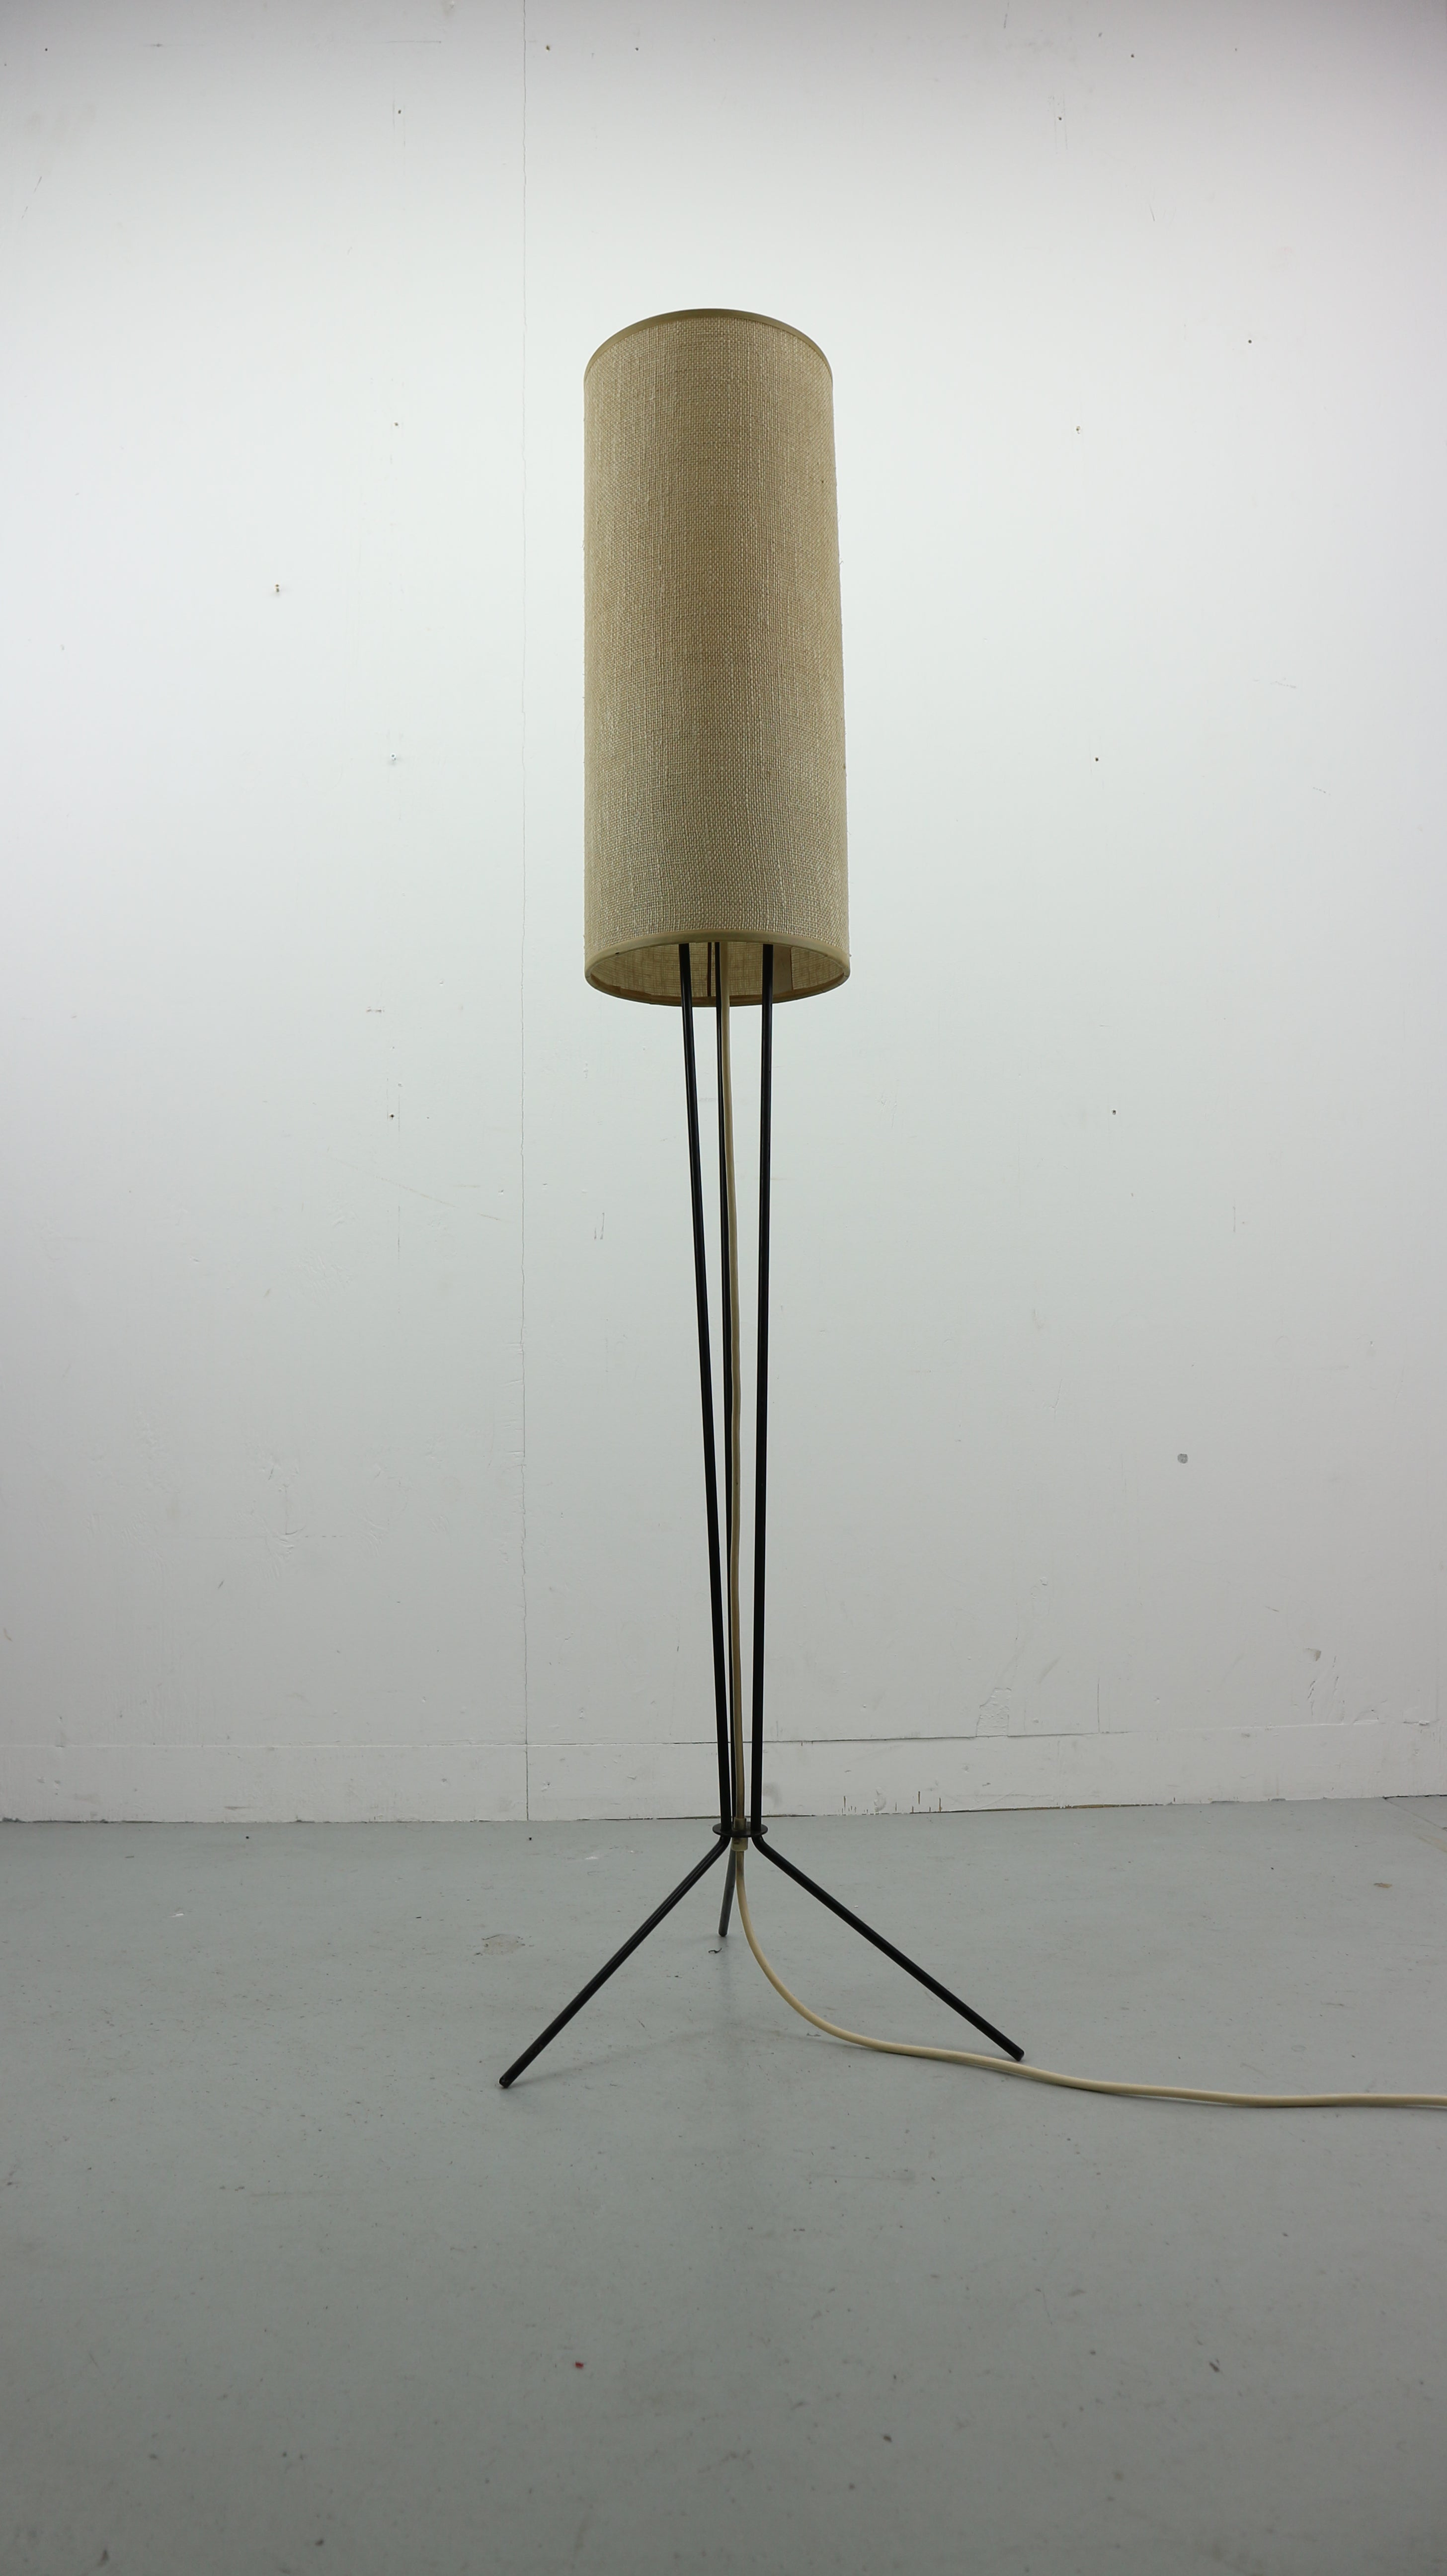 Vintage Tripod Floor Lamp 1950s Bei 1stdibs within sizing 2912 X 5184